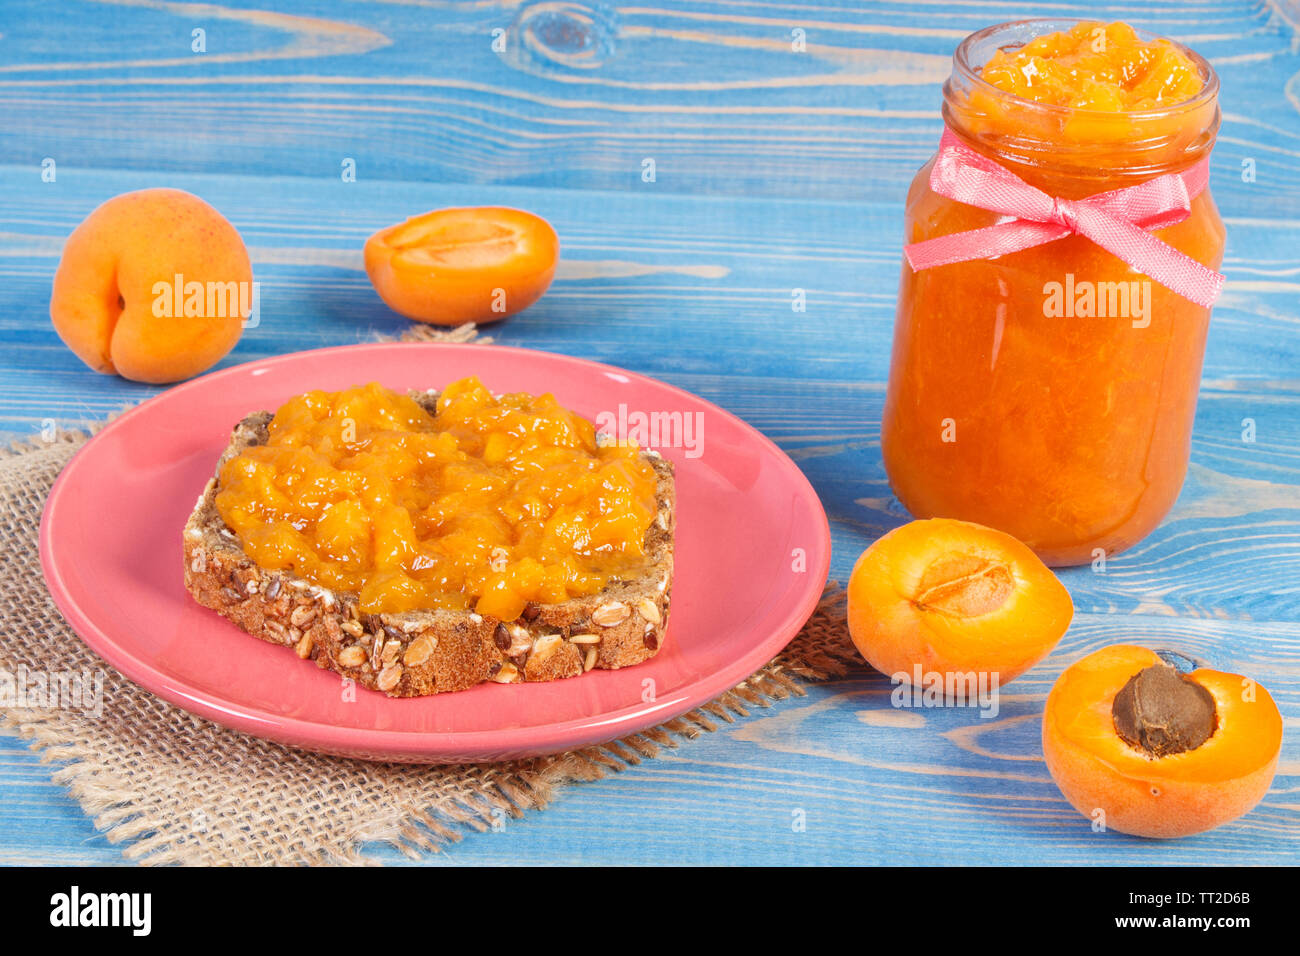 Fresh prepared sandwich with homemade apricot marmalade and ripe fruits, concept of healthy sweet snack Stock Photo